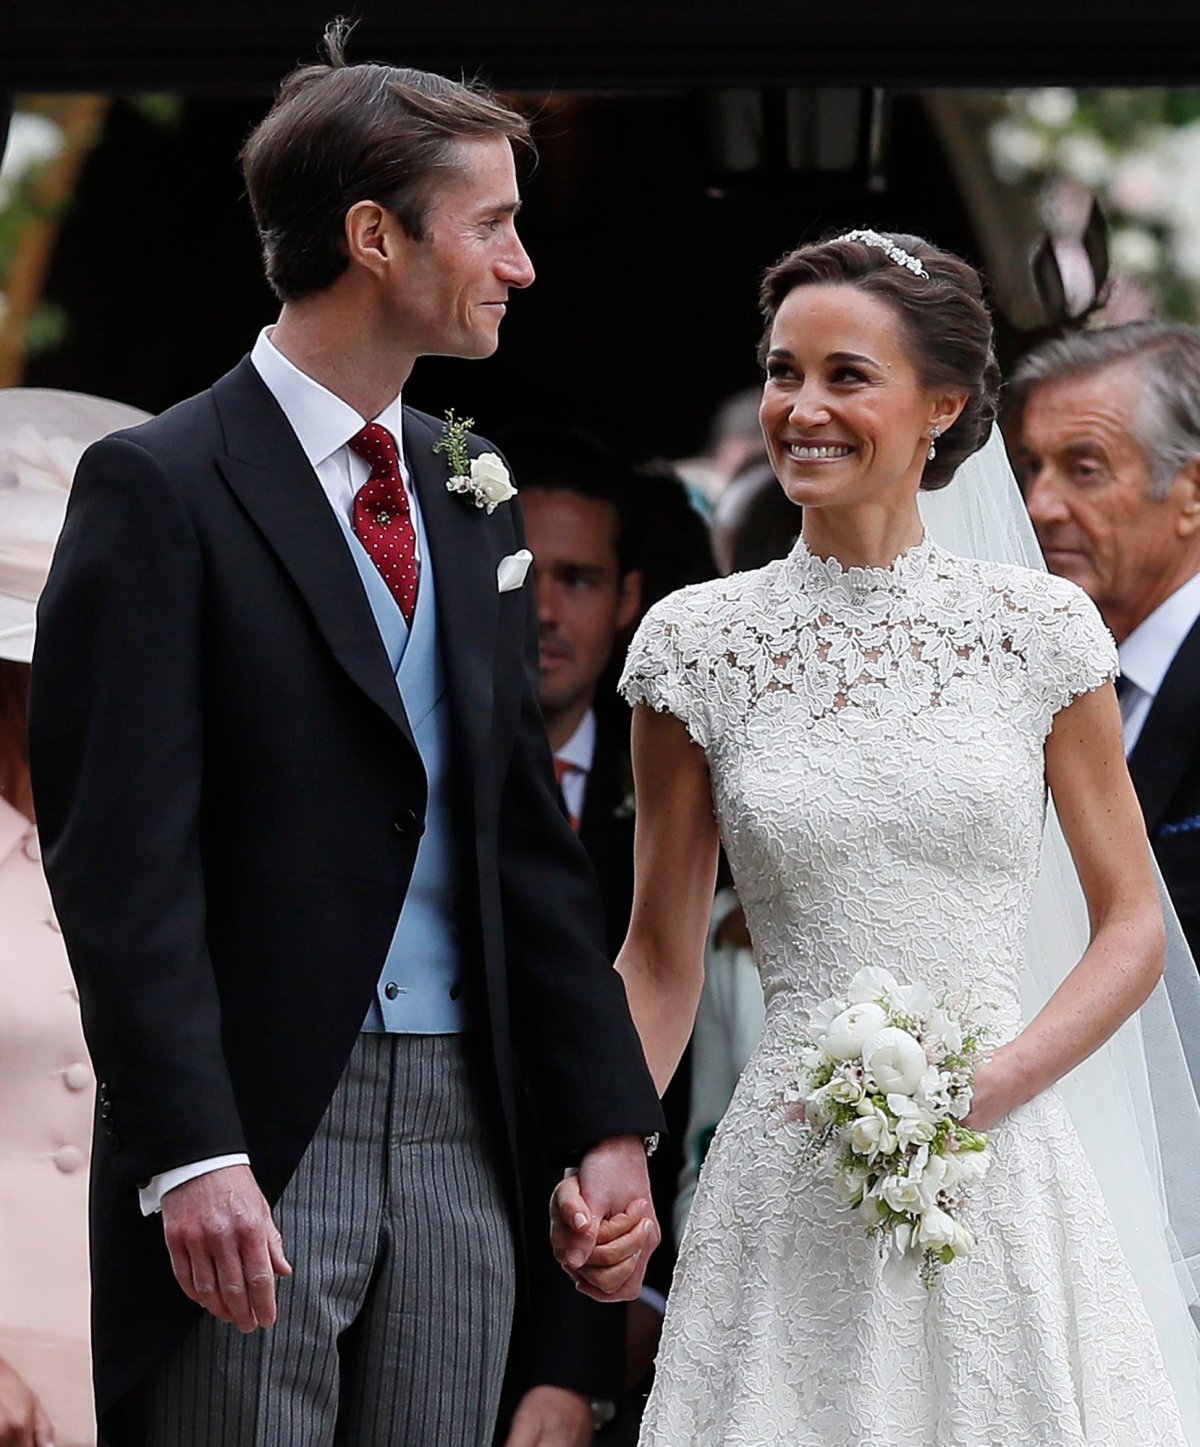 Pippa Middleton and James Matthews smile after their wedding at St Mark's Church in Englefield, England Saturday, May 20, 2017. 